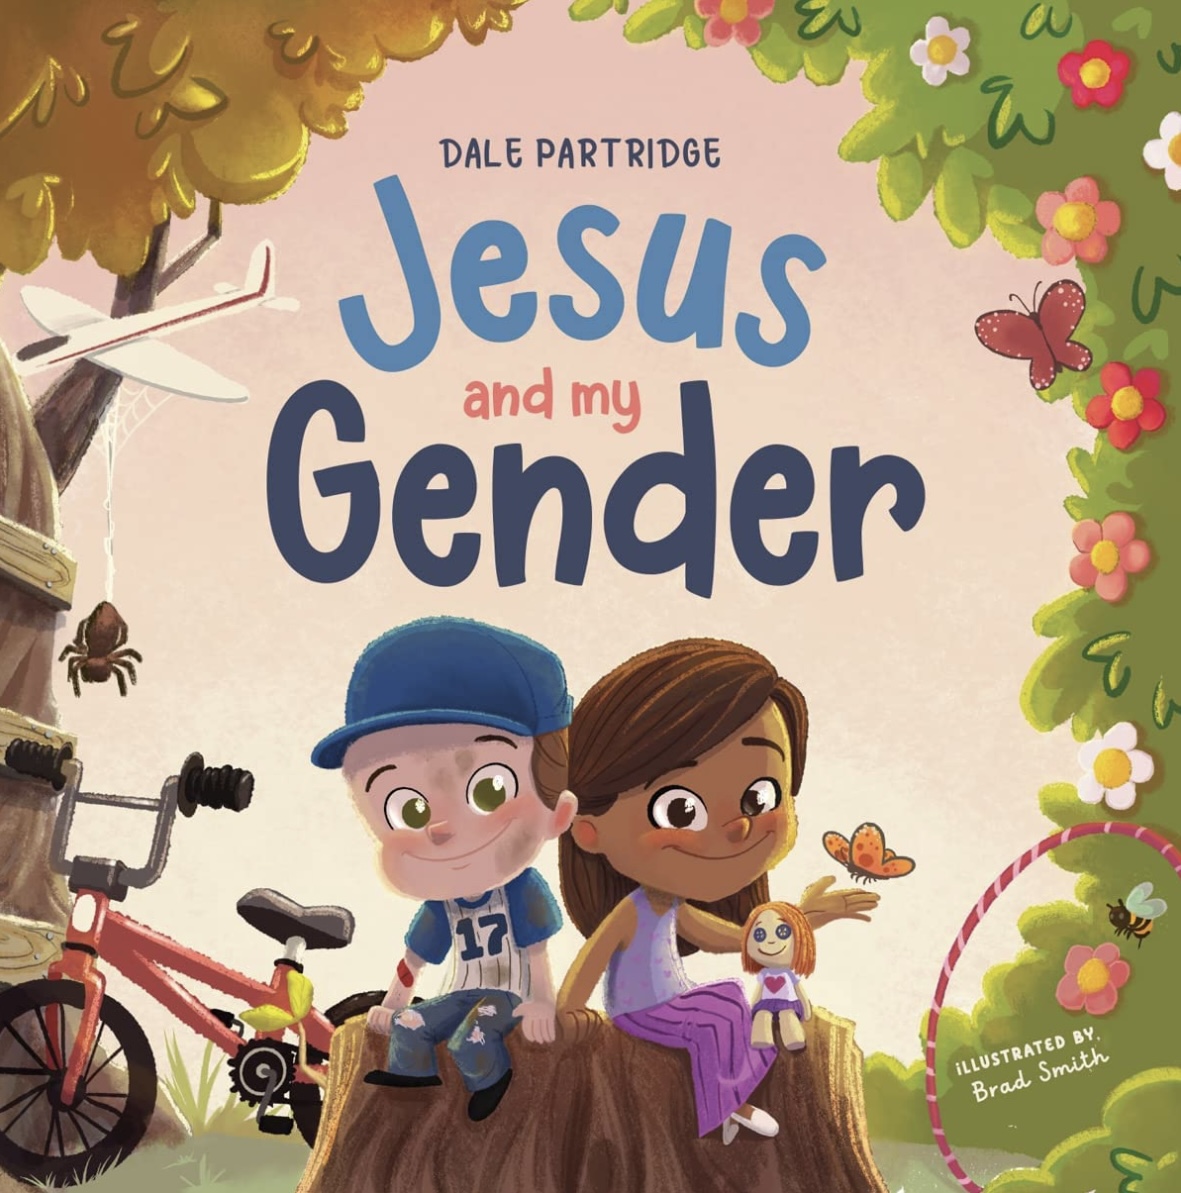 Best Selling Book: Jesus and My Gender Author Dale Partridge Artist: Brad Smith